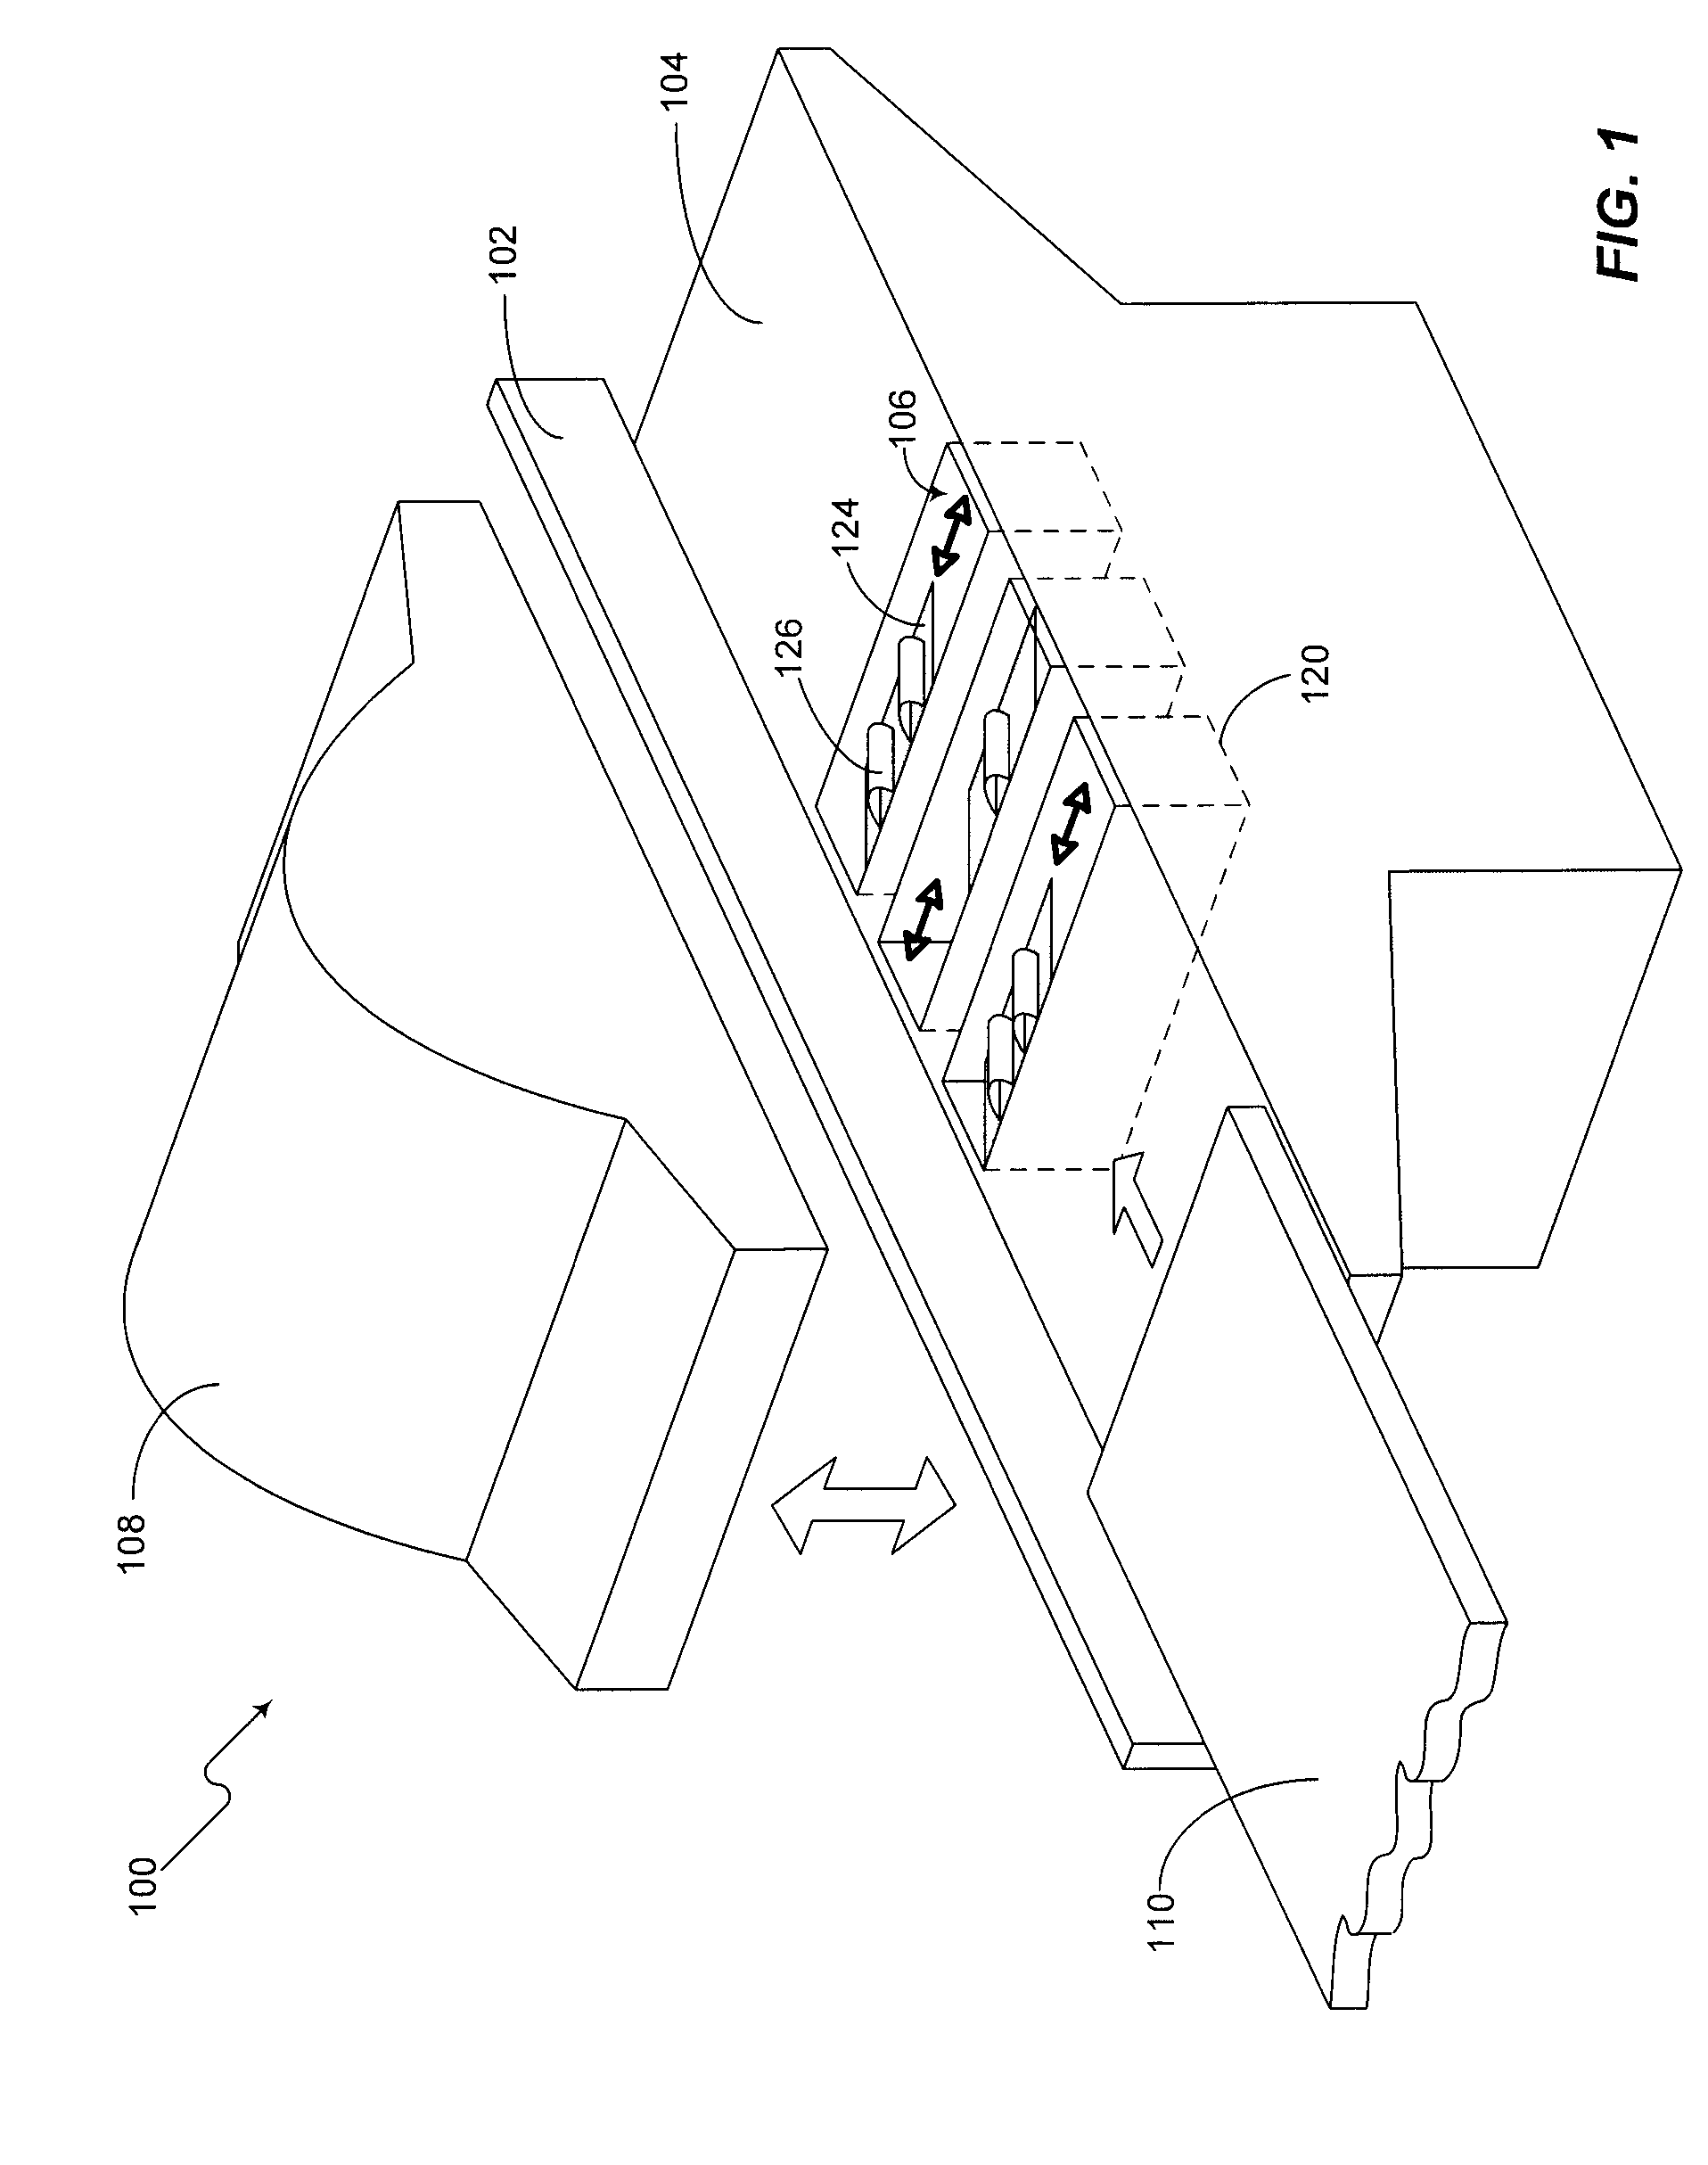 Hardwood texturing apparatus and methods for using same